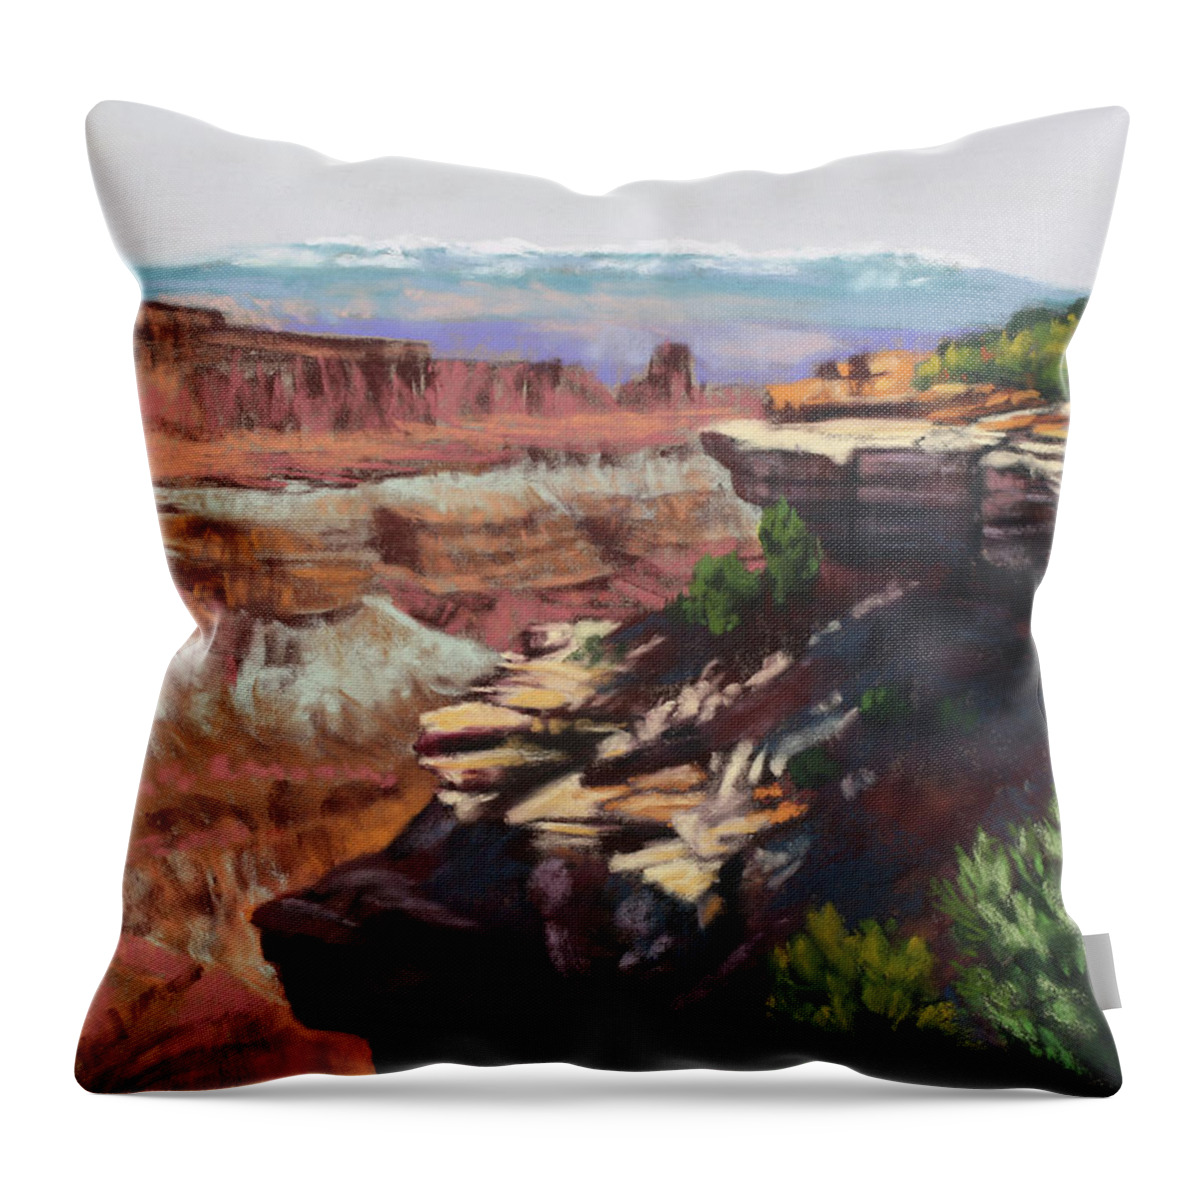 Canyon Throw Pillow featuring the painting Canyon Shadows by Sandi Snead